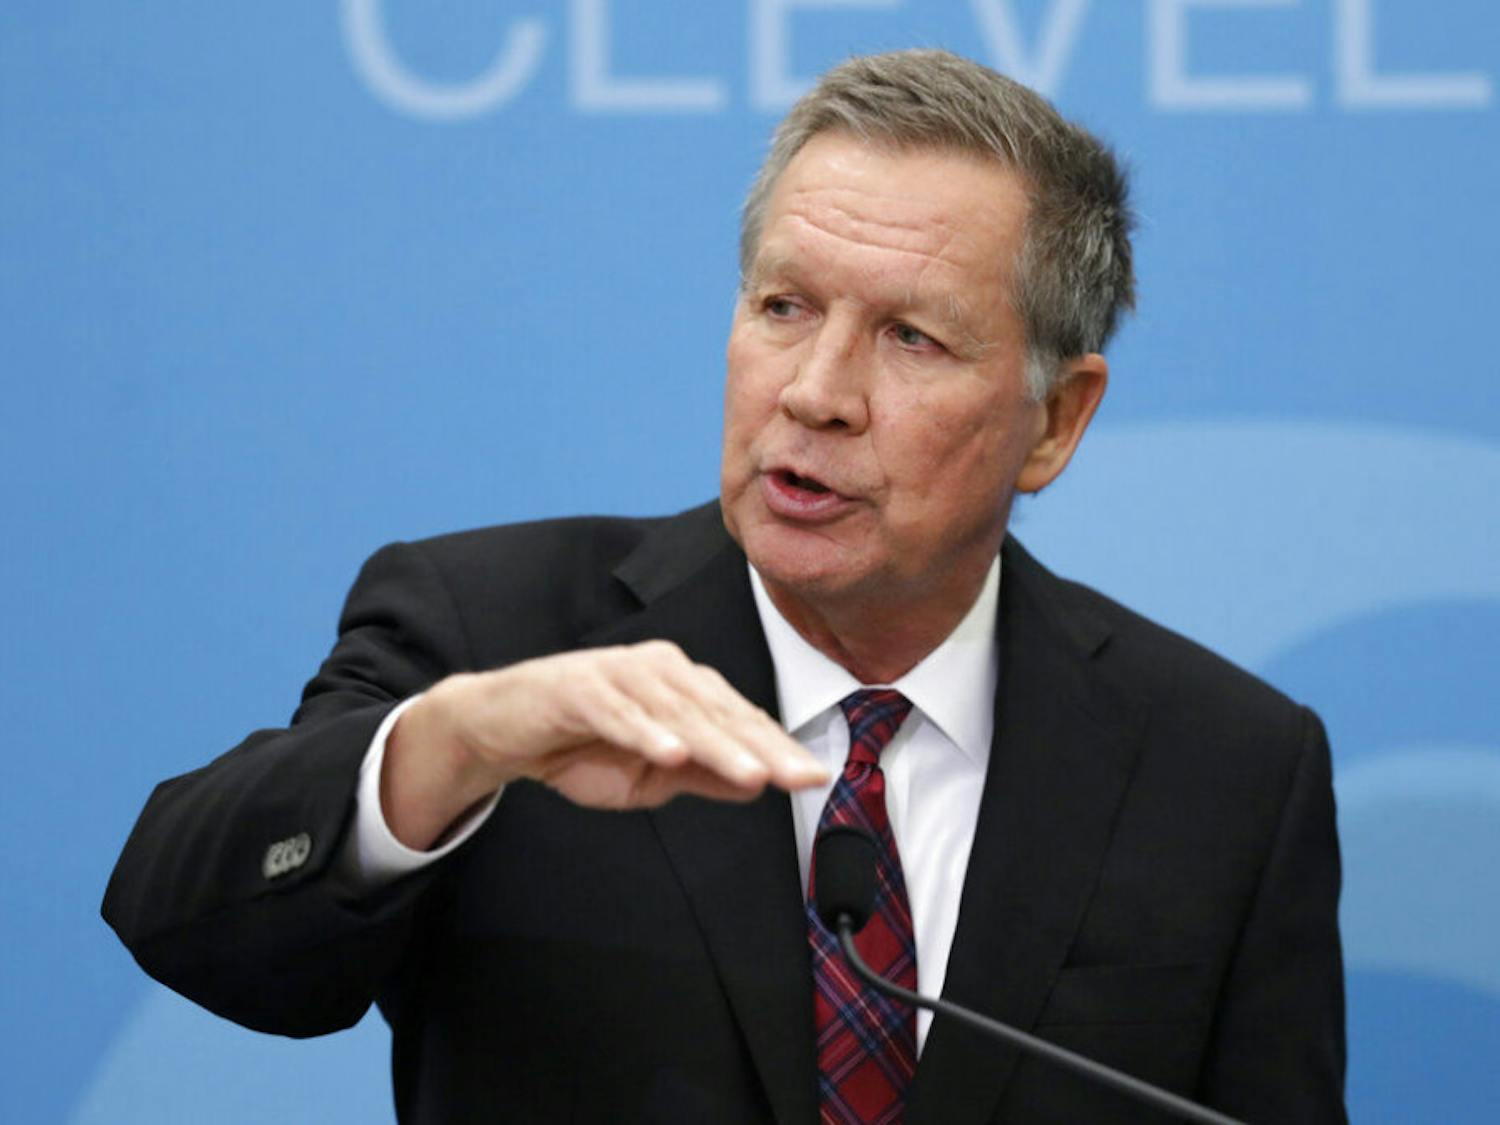 In this Dec. 4, 2018, then Ohio Gov. John Kasich speaks at The City Club of Cleveland, in Cleveland. Kasich, now Ohio’s ex-governor, has landed himself a talent agent as the potential 2020 presidential candidates contemplates his future. (AP Photo/Tony Dejak)